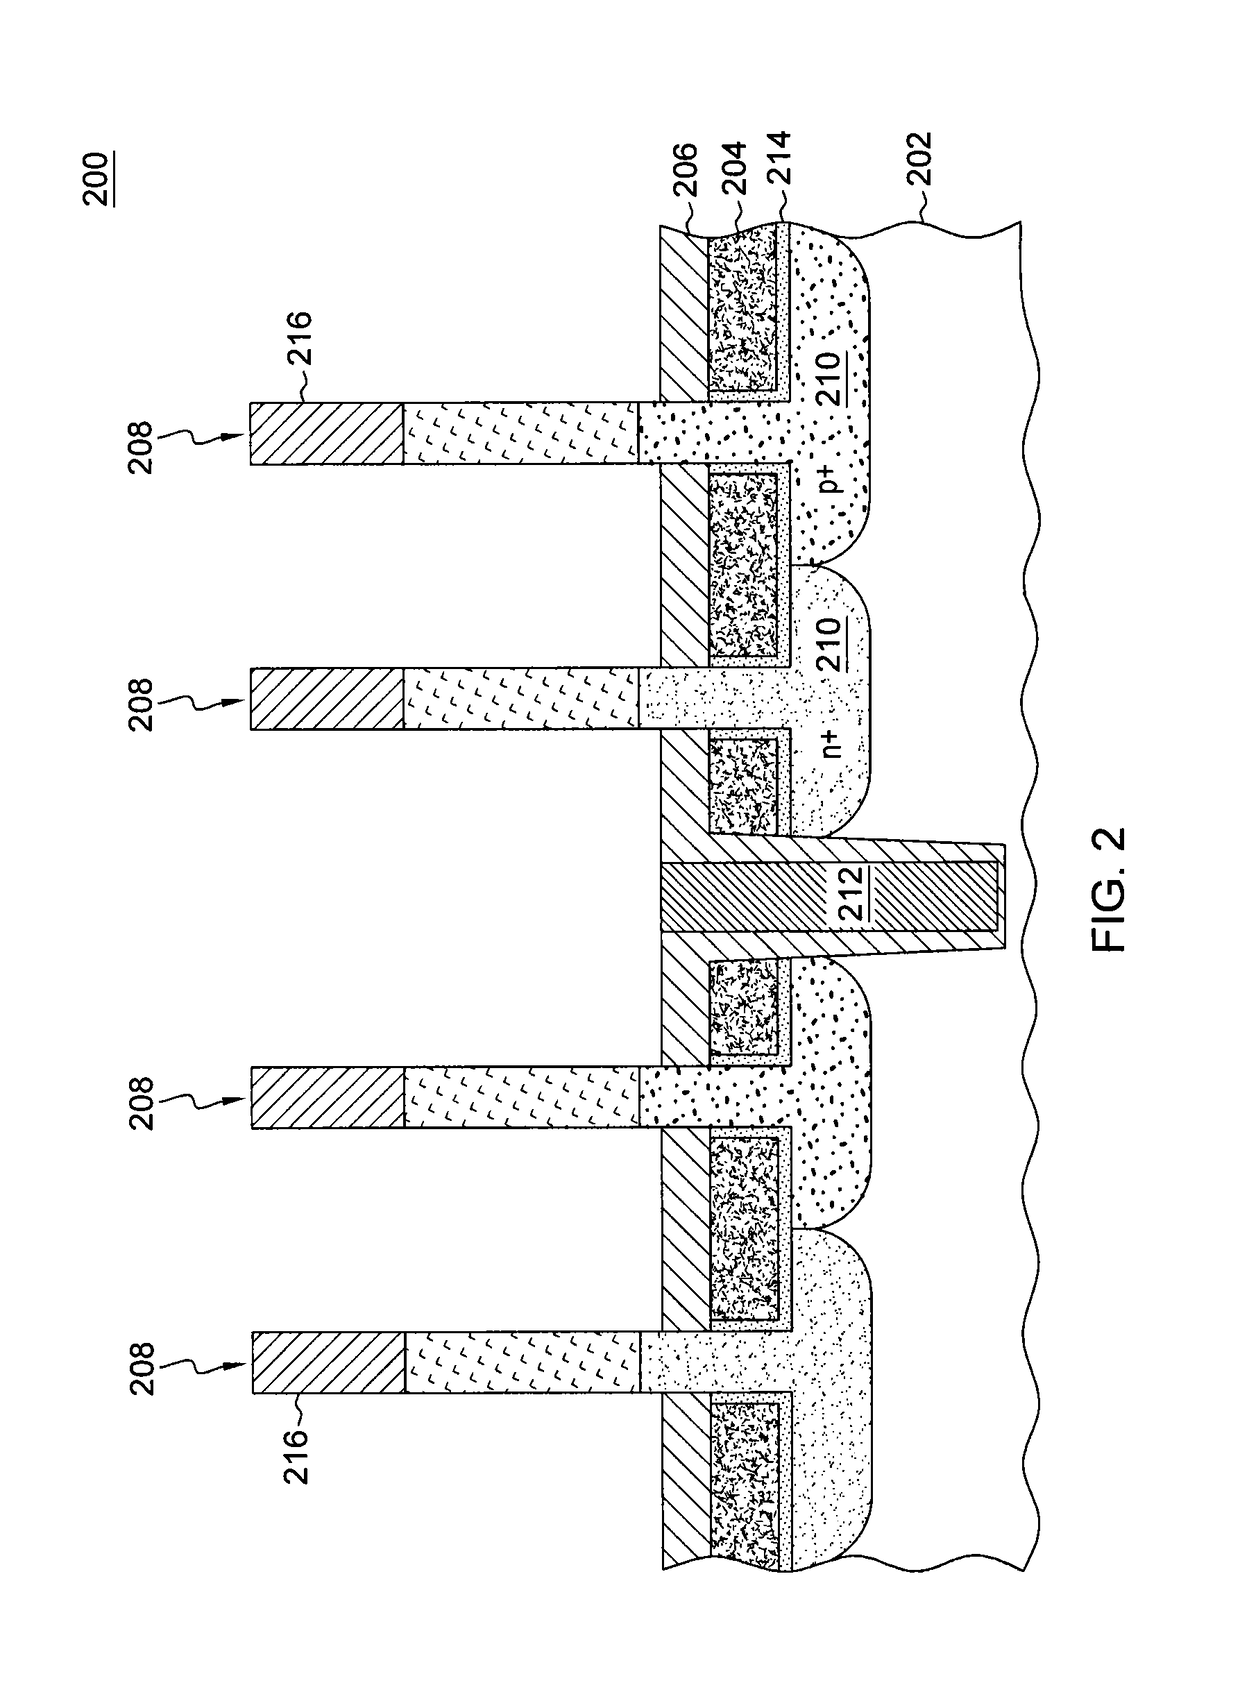 Devices and methods of forming VFET with self-aligned replacement metal gates aligned to top spacer post top source drain EPI